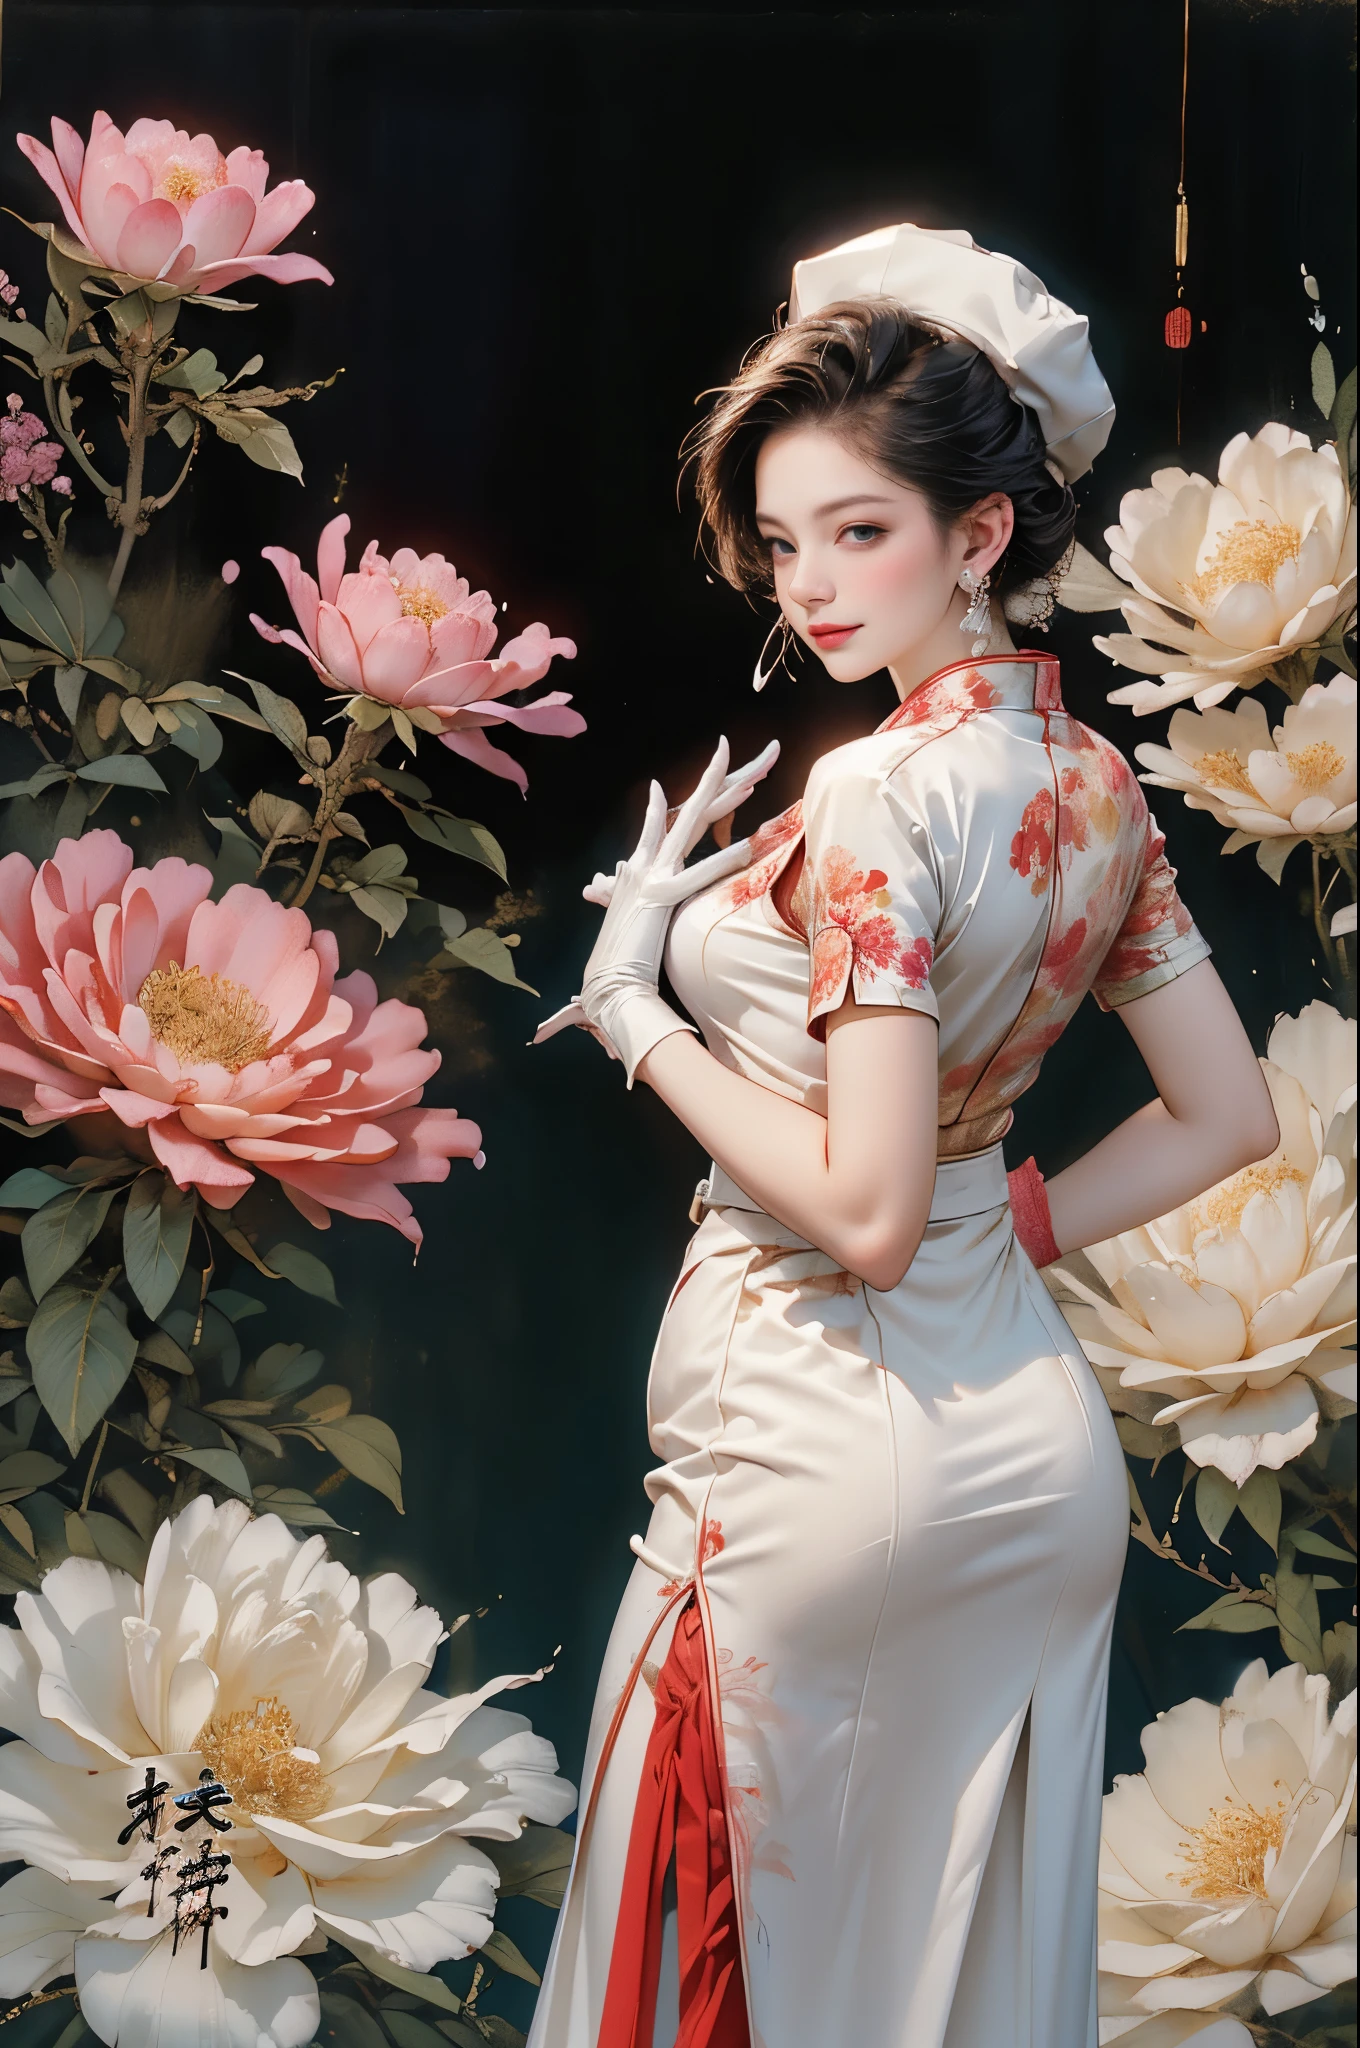 （tmasterpiece，quality，Best quality，offcial art，Beauty and aesthetics：1.2）， 1 Lady, nurses, tightsuit, nurses Cap, White sanitary ware, ((Below is the white one, absolute chance)), Tight gloves, whitegloves, ssmile, everlasting, Watch from behind, looking back over shoulder at viewer, Clear silhouette, short- sleeved, A mature woman, 35yo, middlebreast, Transcendent, lacivious pose, The are visible，Very meticulous，（s fractal art：1.1），（One color：1.1）（flowers in full bloom：1.3），Most detailed，（ tangled:1.2), (lacivious pose), (abstract backgrounds:1.3), (Traditional Chinese fabrics:1.2), (Skin glows), (Lots of colors:1.4), ,(ear nipple ring:1.4)，（Decorative painting：1.6，）， lamplight,Ink painting and waterconk，water ink，